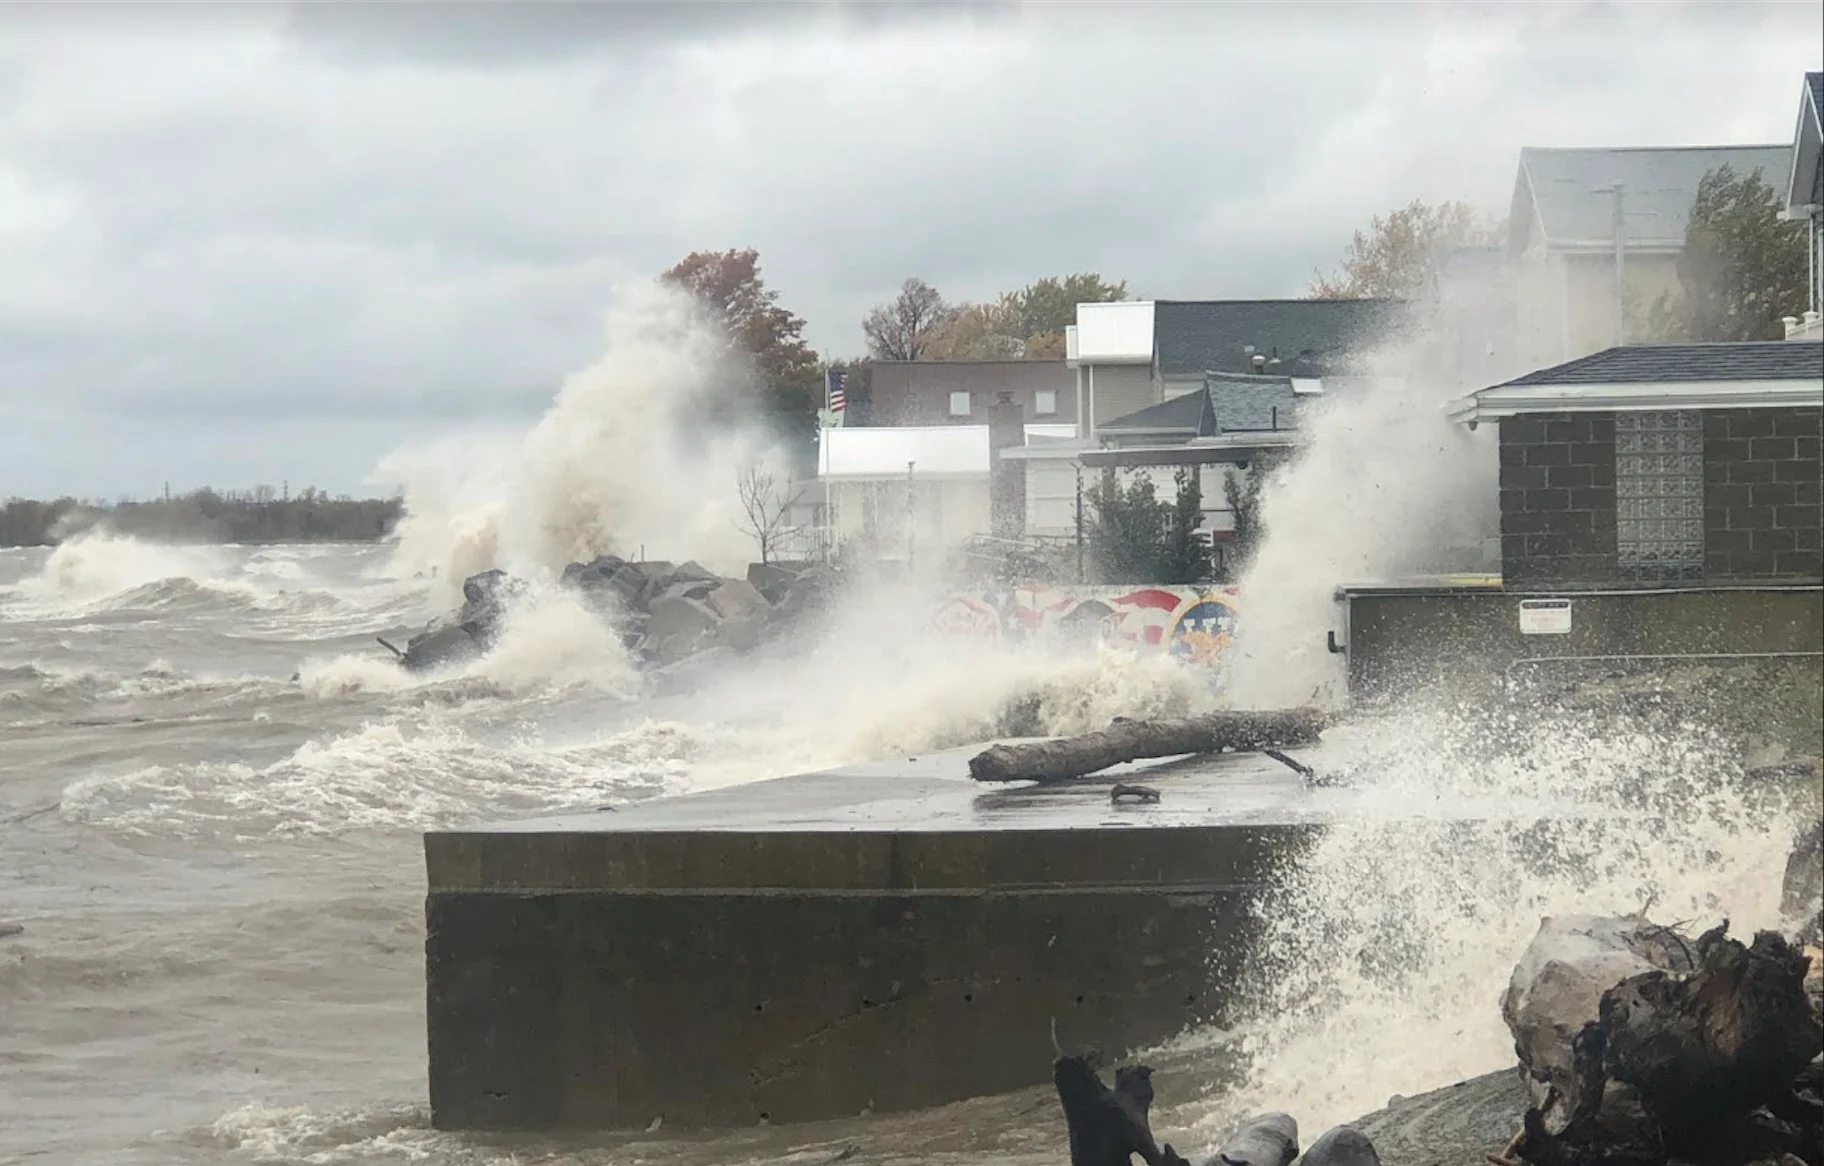 Waves along Lake Erie. Halloween 2019 source: Sean Crotty, submitted